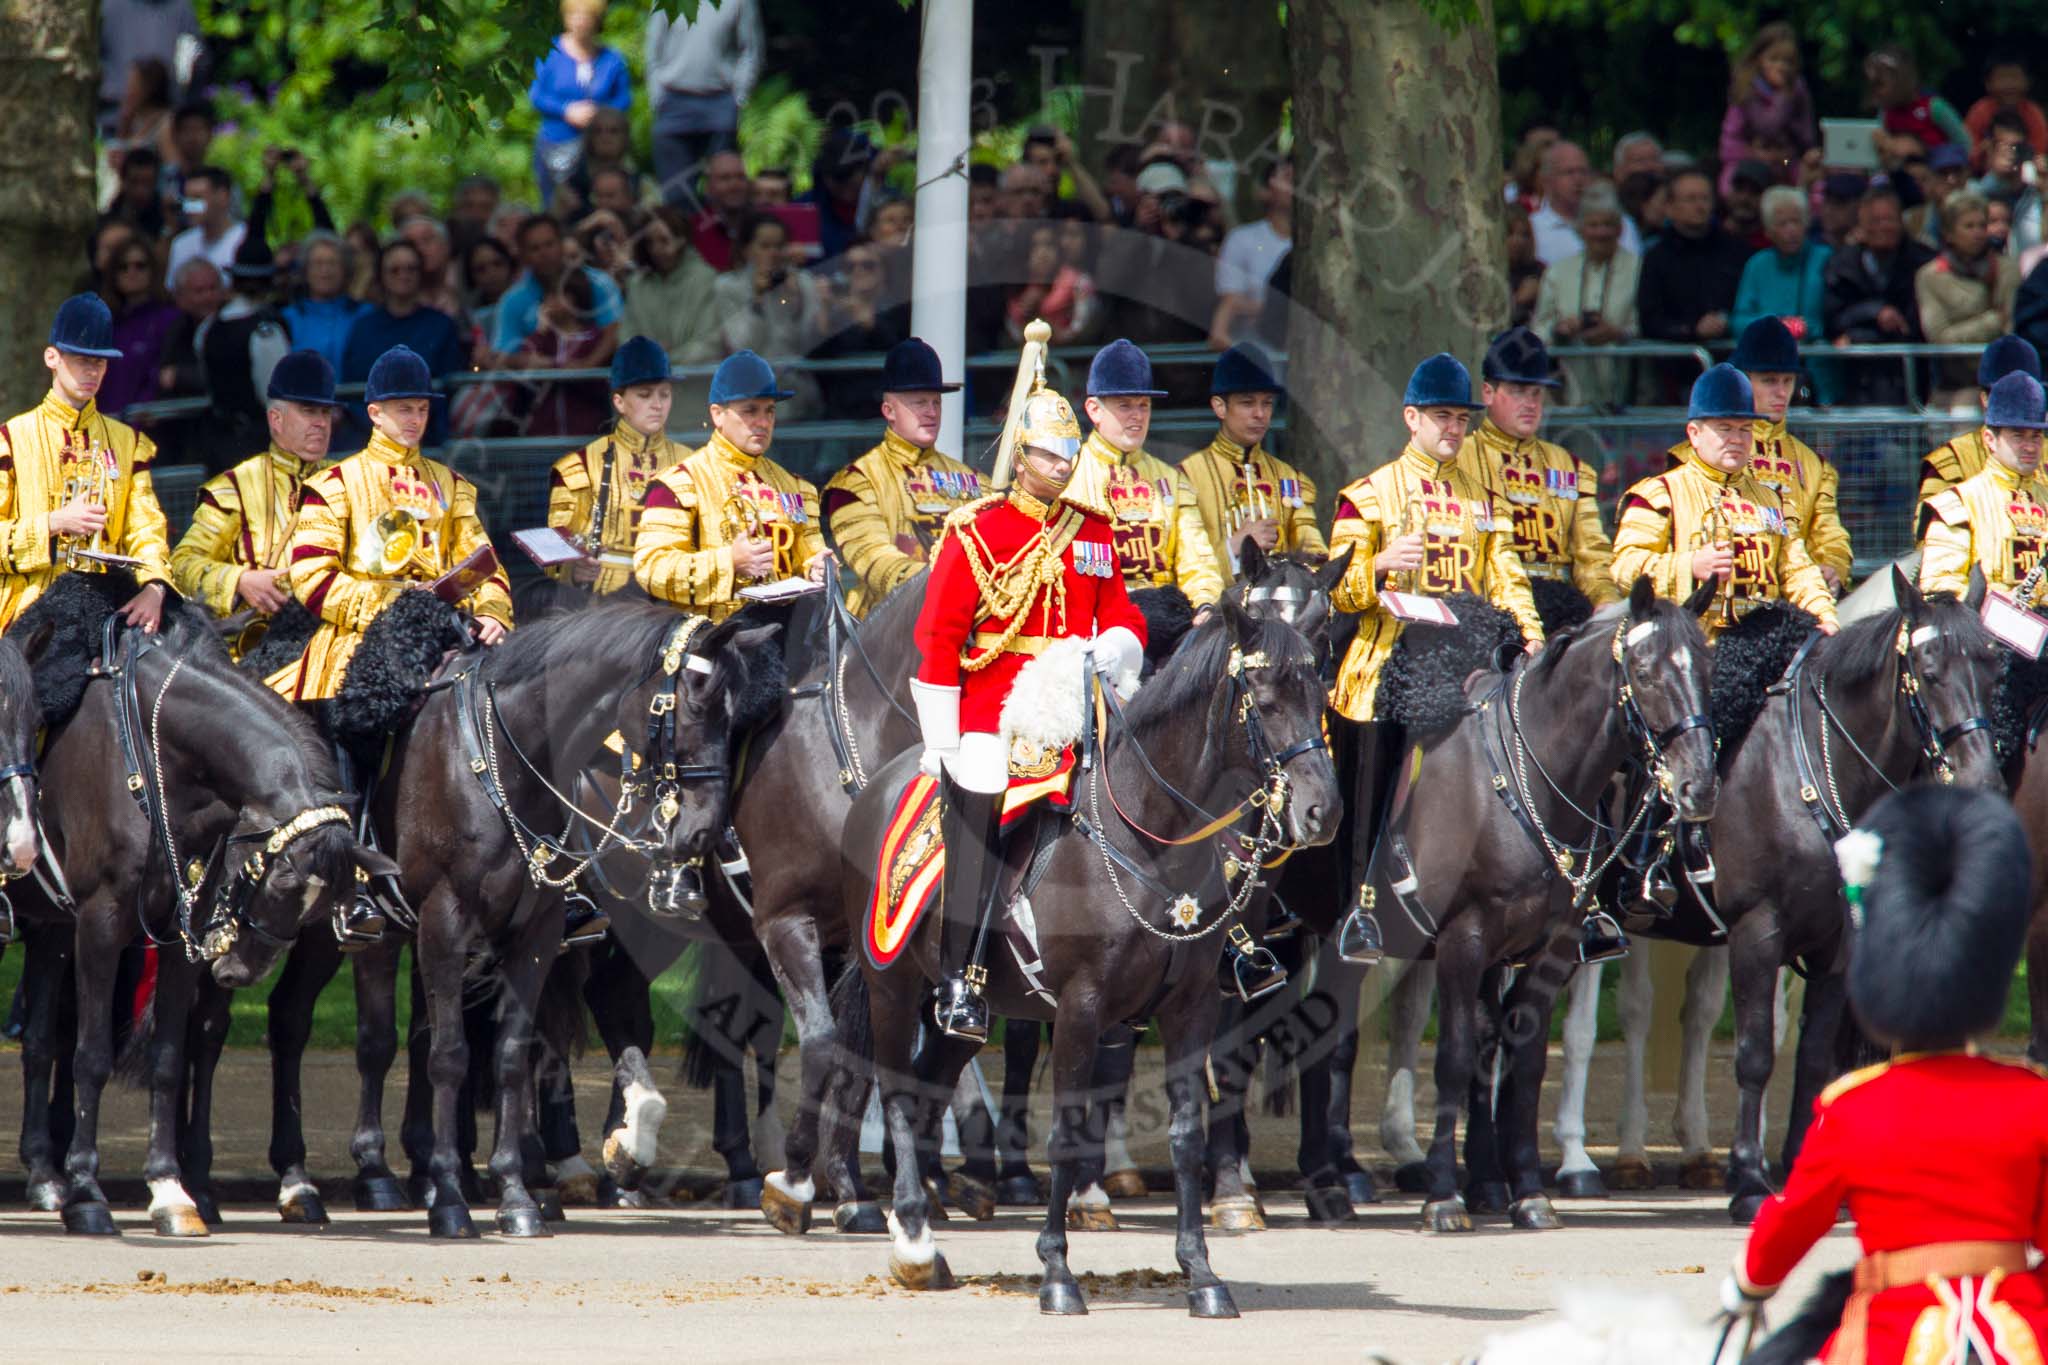 The Colonel's Review 2013: the Mounted Bands of the Household Cavalry..
Horse Guards Parade, Westminster,
London SW1,

United Kingdom,
on 08 June 2013 at 11:39, image #669